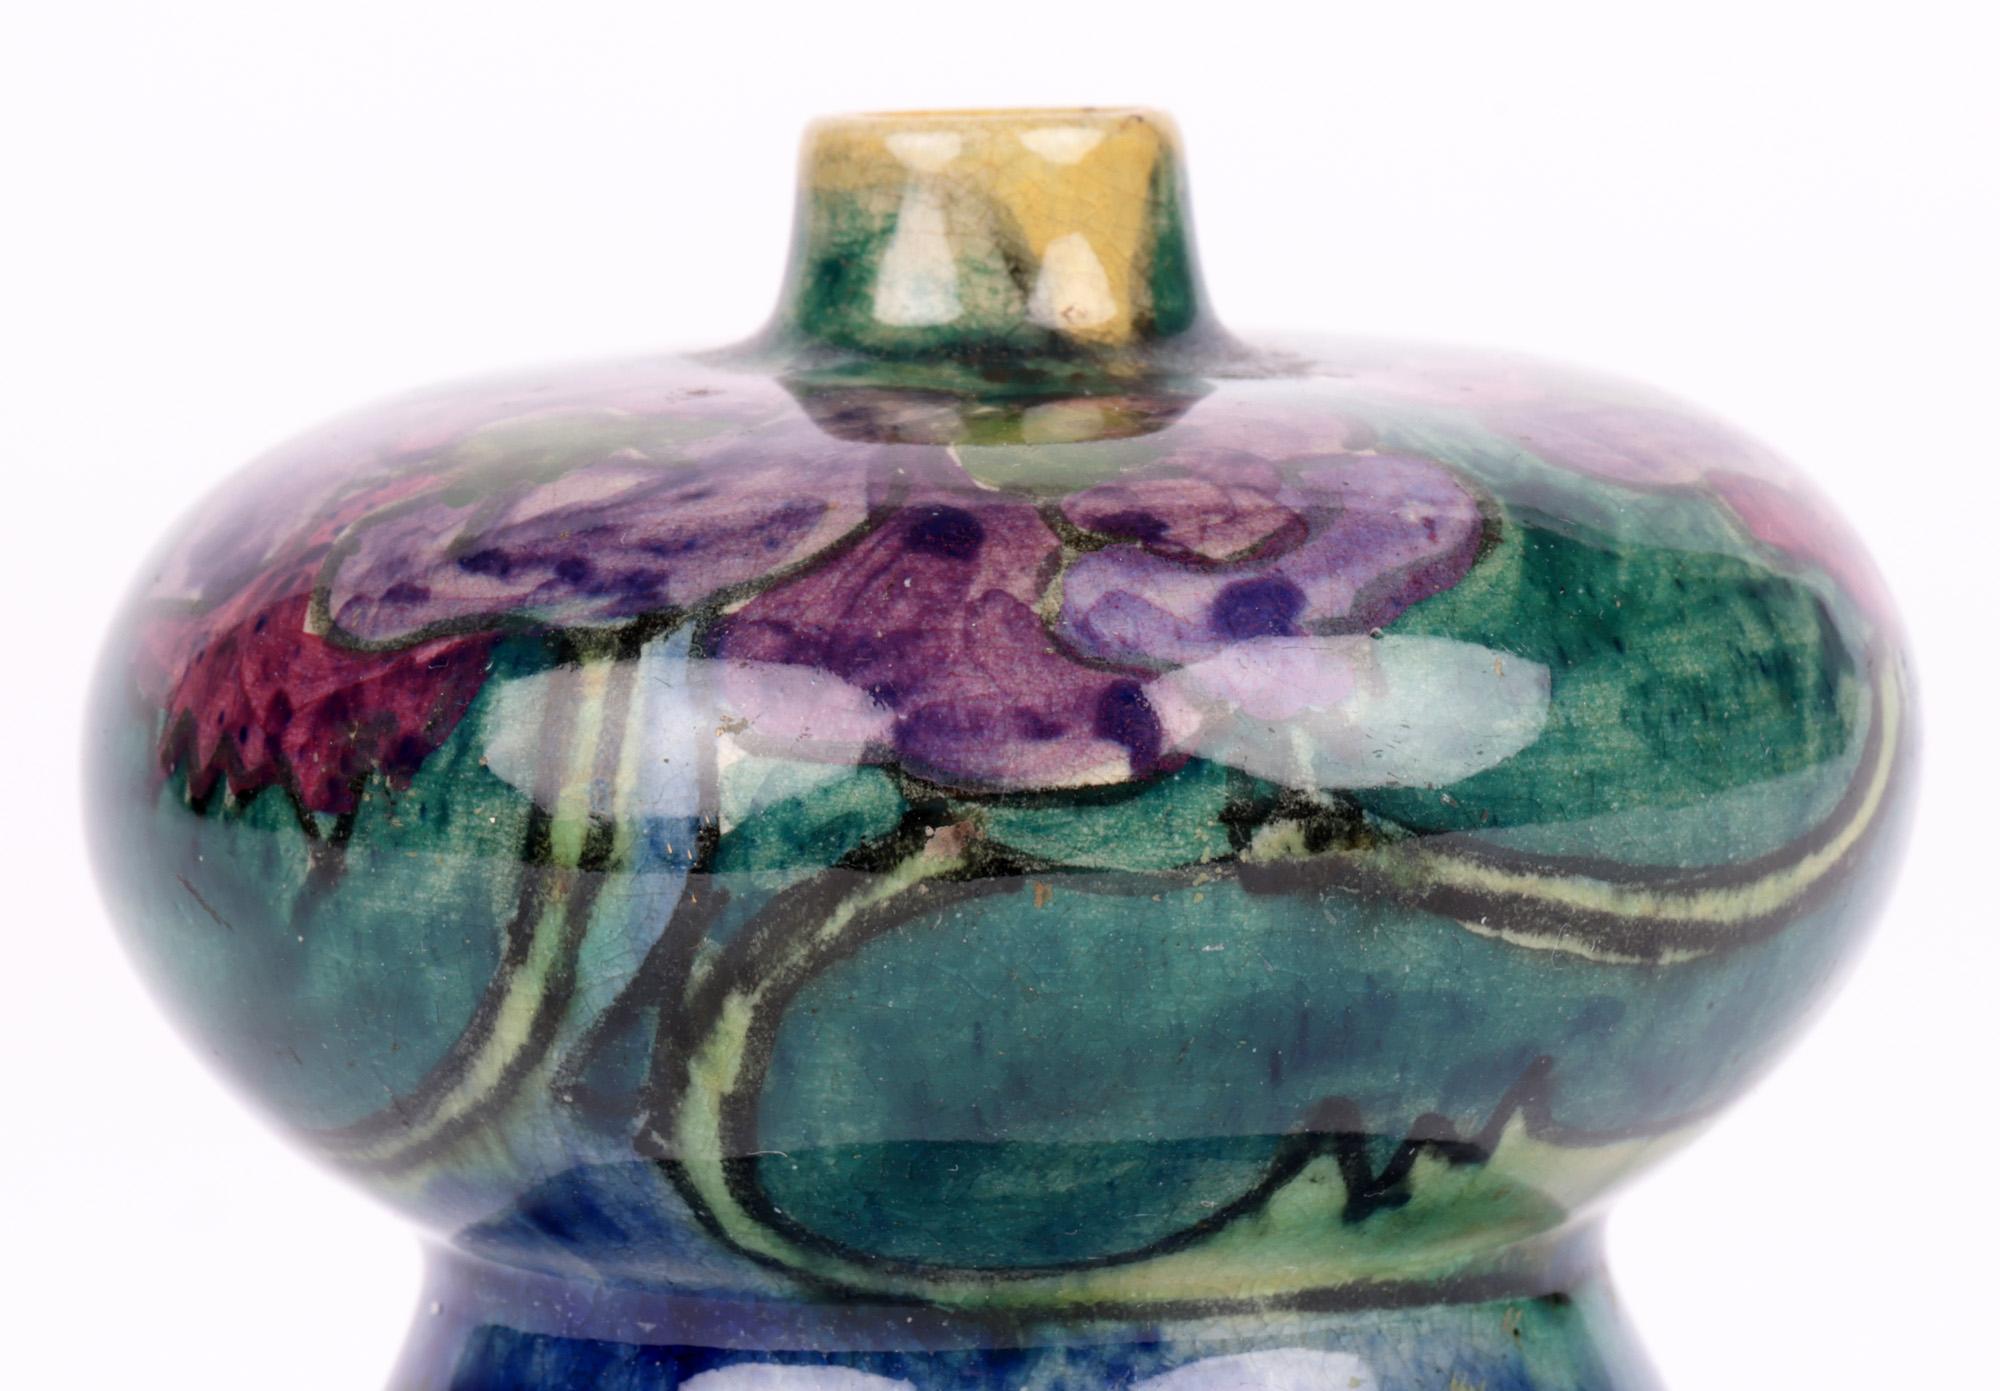 An exceptional and rare quality Dutch hand-painted floral design art pottery vase made at the Plateelbakkerij Zuid-Holland (PZH) Gouda factory and dating from the early 20th century. The finely made miniature vase is made in an inverted thistle